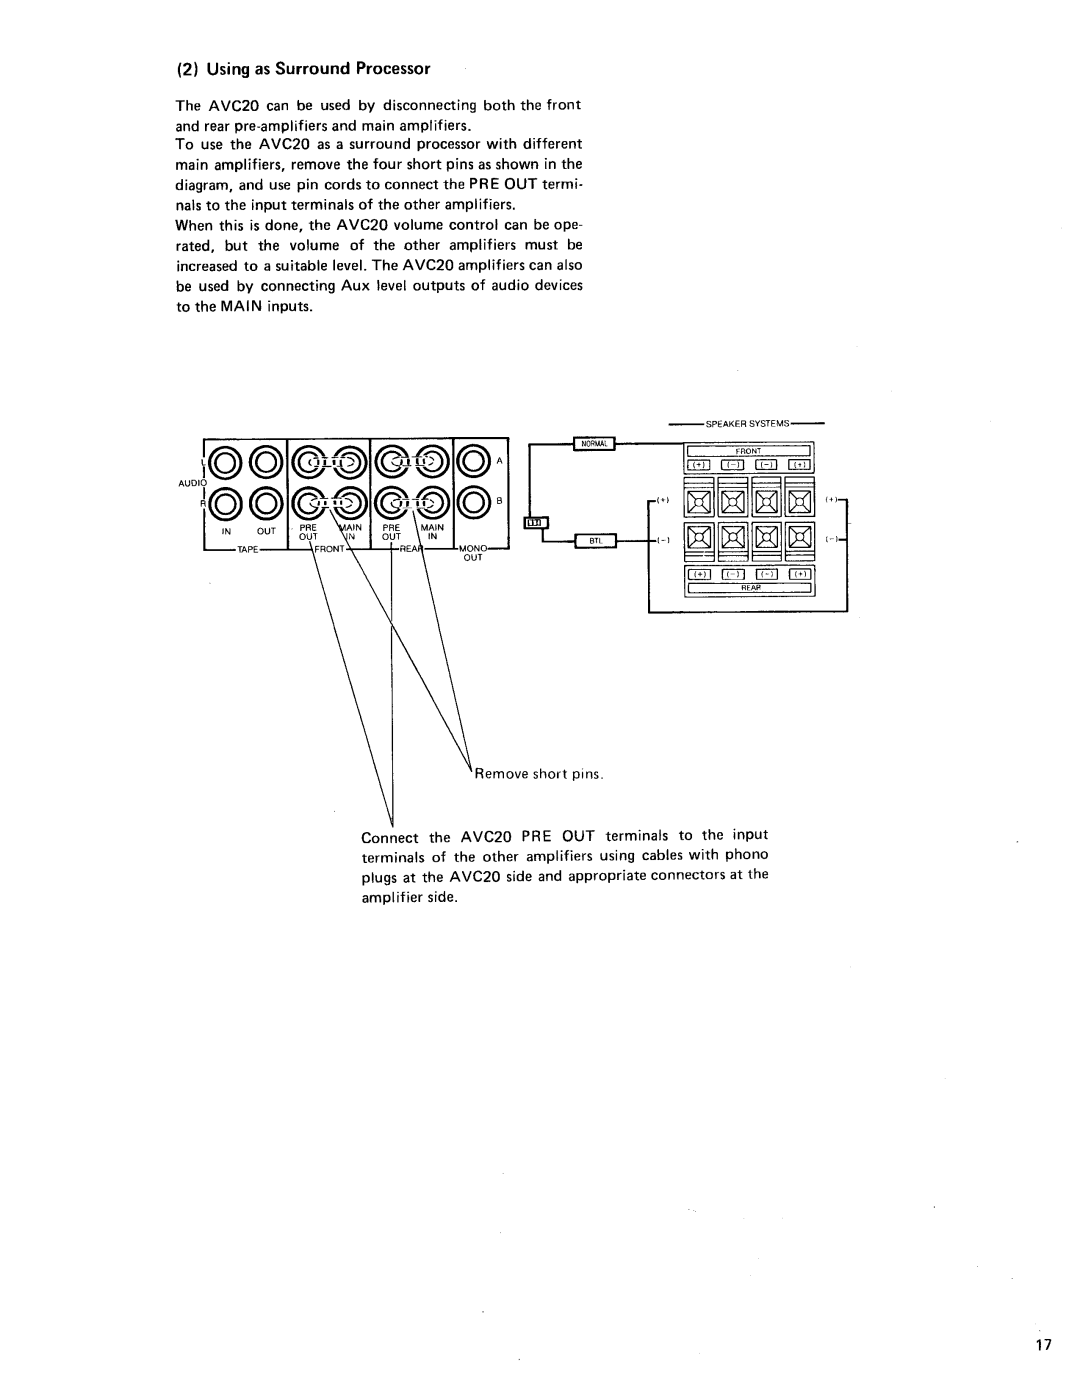 Shure AVC20 owner manual 2Using as Surround Processor, S P E A K E R Systems 